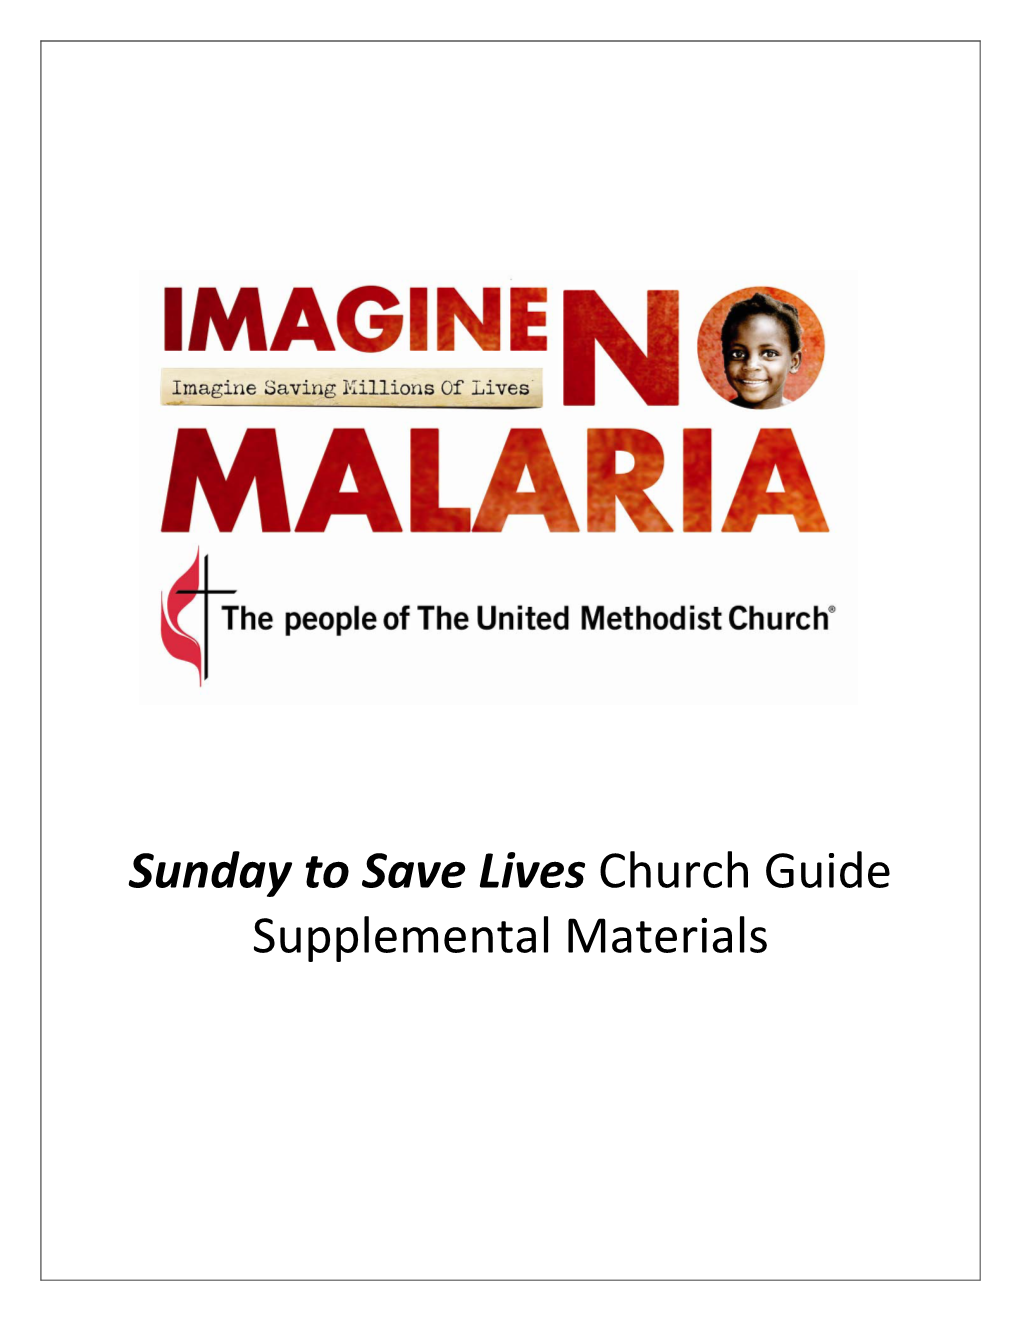 Sunday to Save Lives Church Guide Supplemental Materials